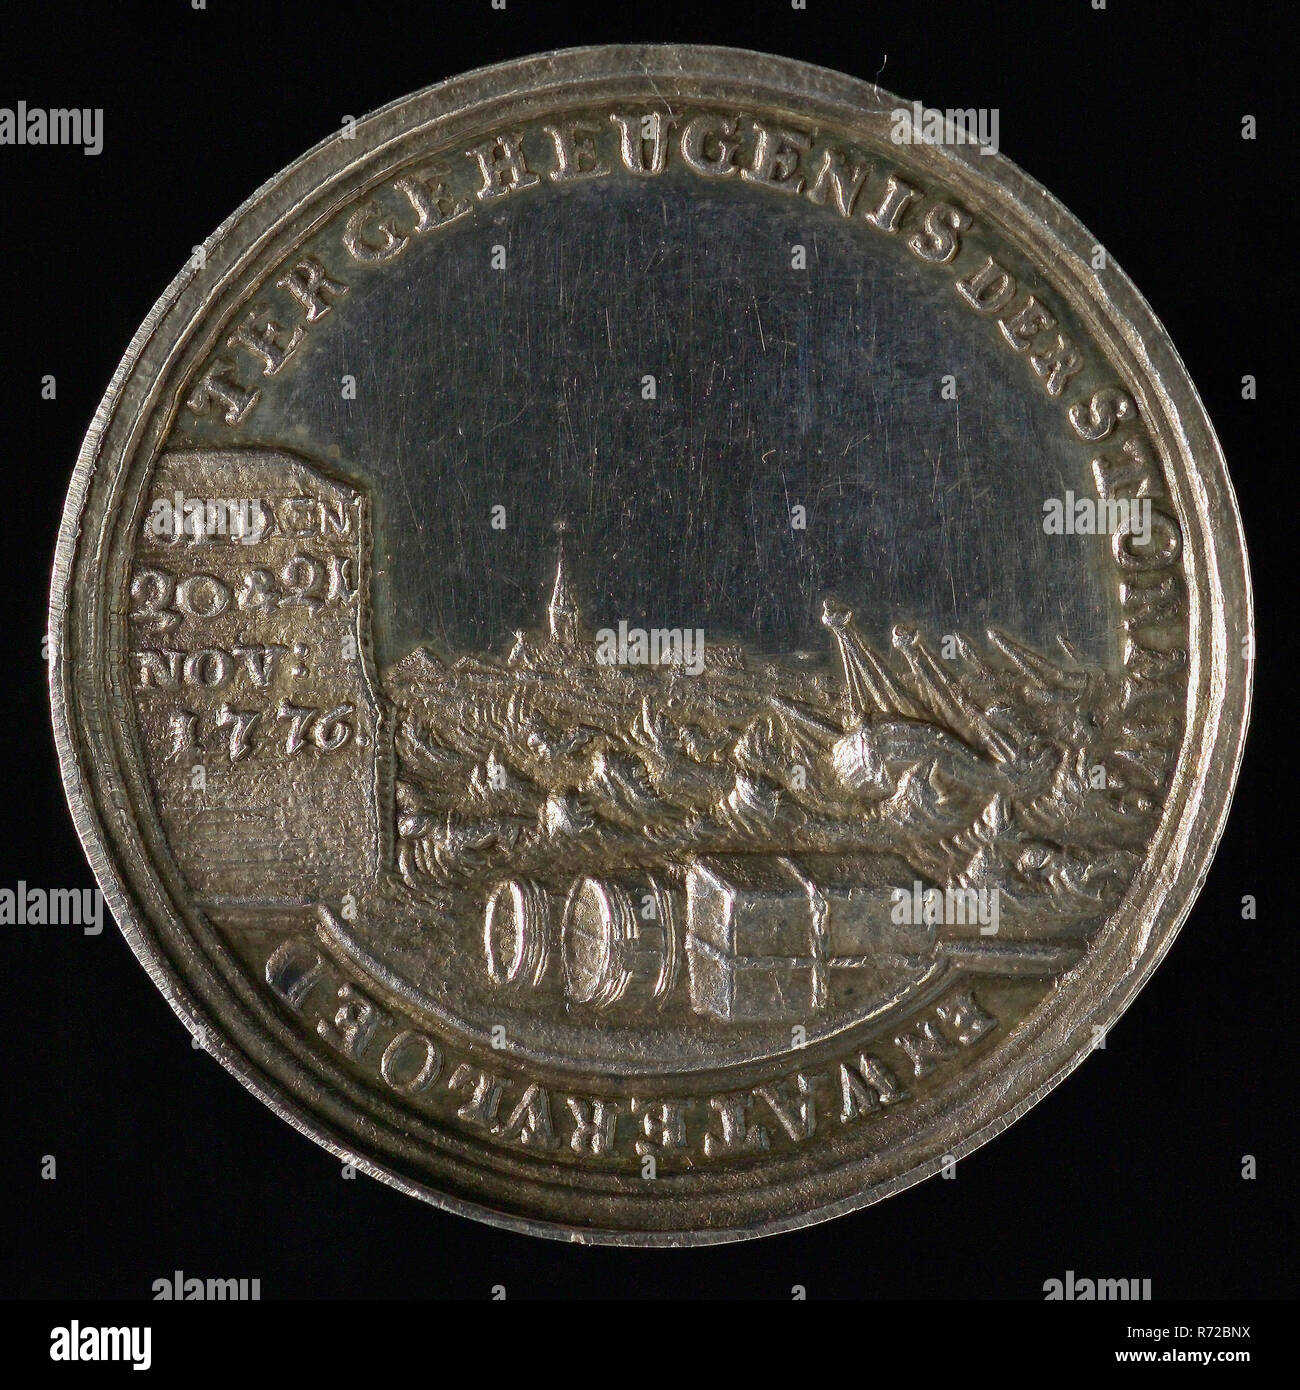 J.M. Lageman, Medal to commemorate storms and floods on 20 and 21 November 1776, penning footage silver, beach scene with shattered ships in the foreground washed up merchandise, omschrift TER MEMORIES OF THE STORM AND WATER FLOOR on the side wall OP DEN 20 & 21 NOV 1776 Stock Photo